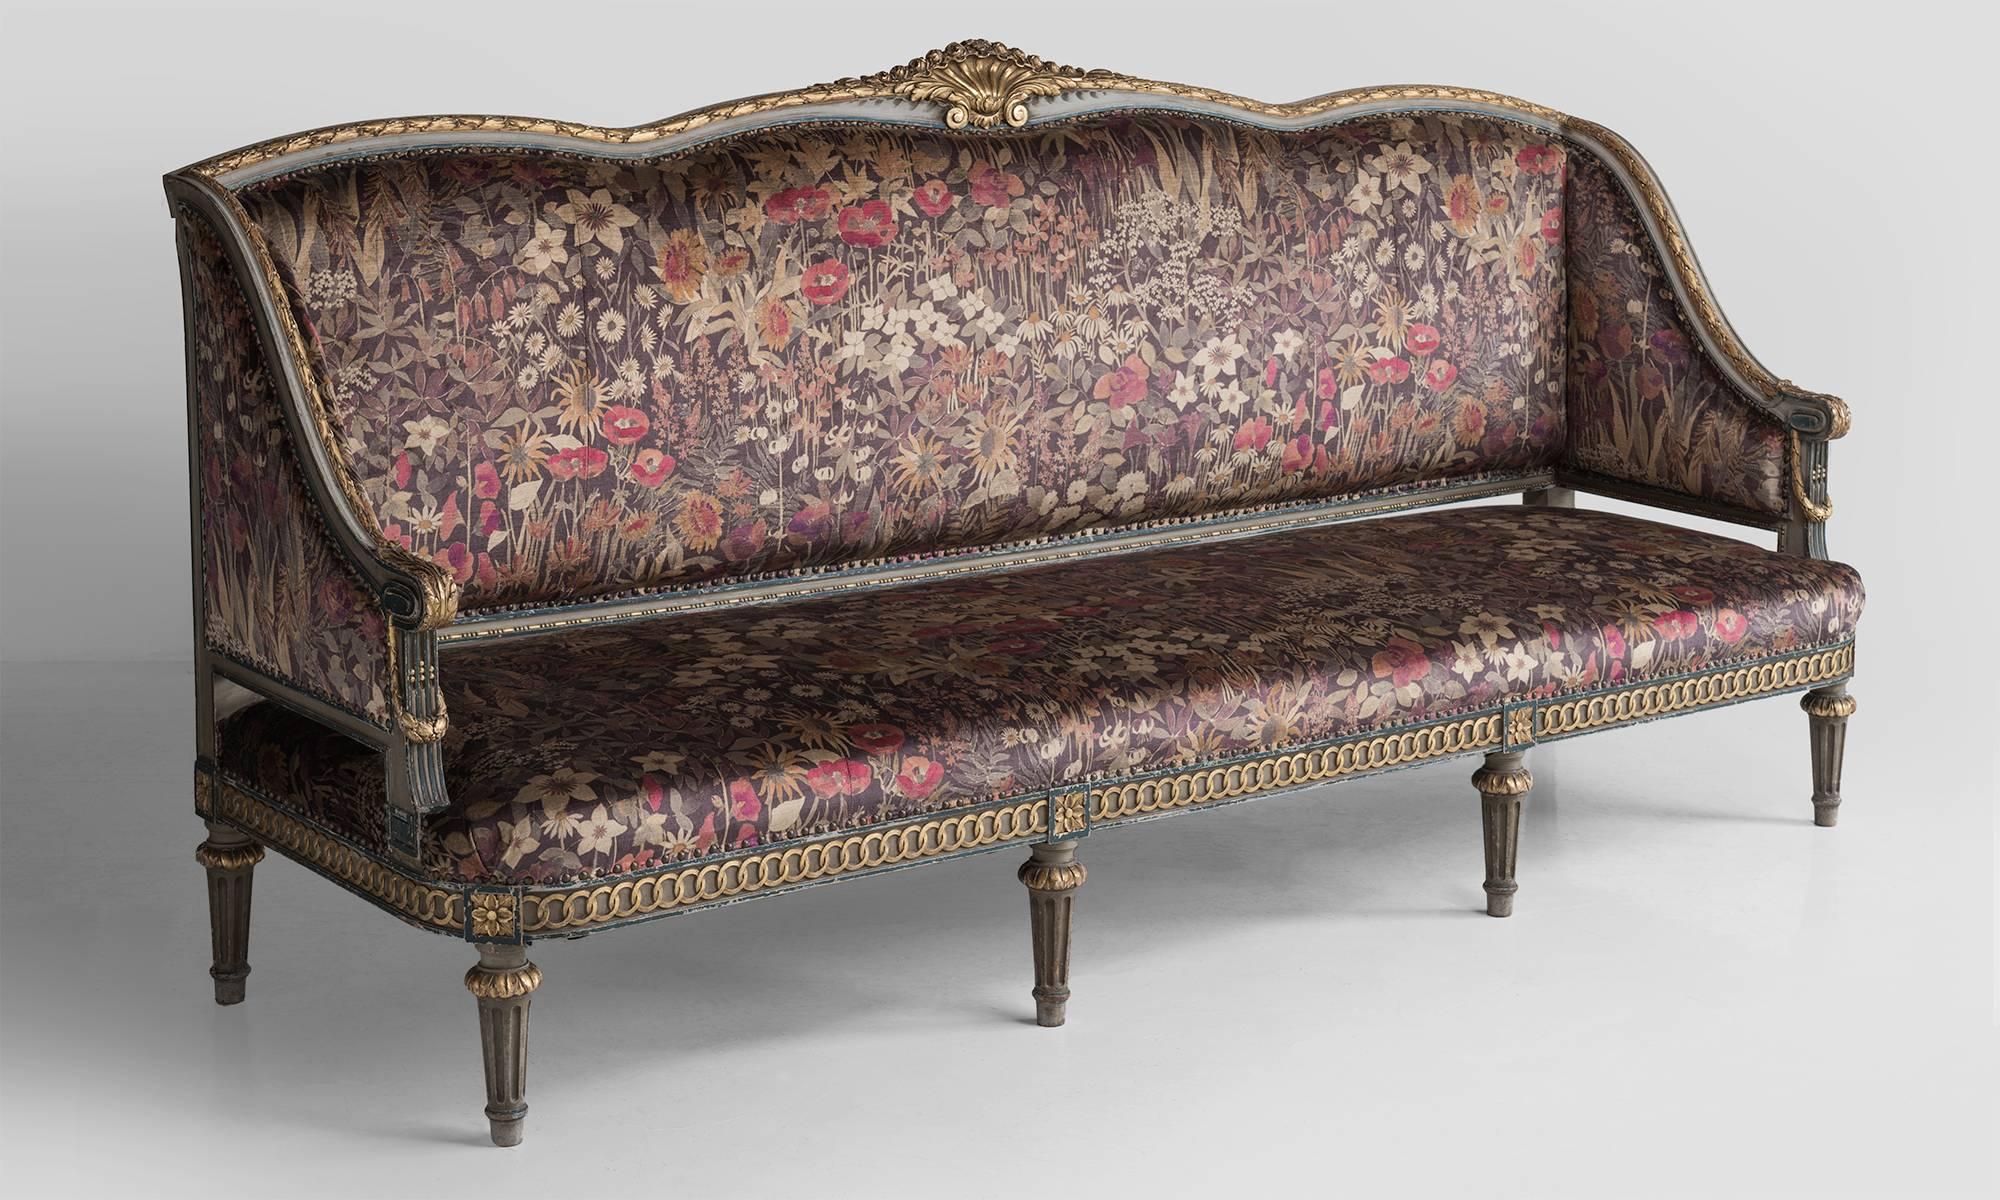 Louis XVI giltwood sofa, circa 1880

Beautifully sculpted gold gilt frame in original period paint. Newly upholstered in Liberty of London velvet.

Measures: 16